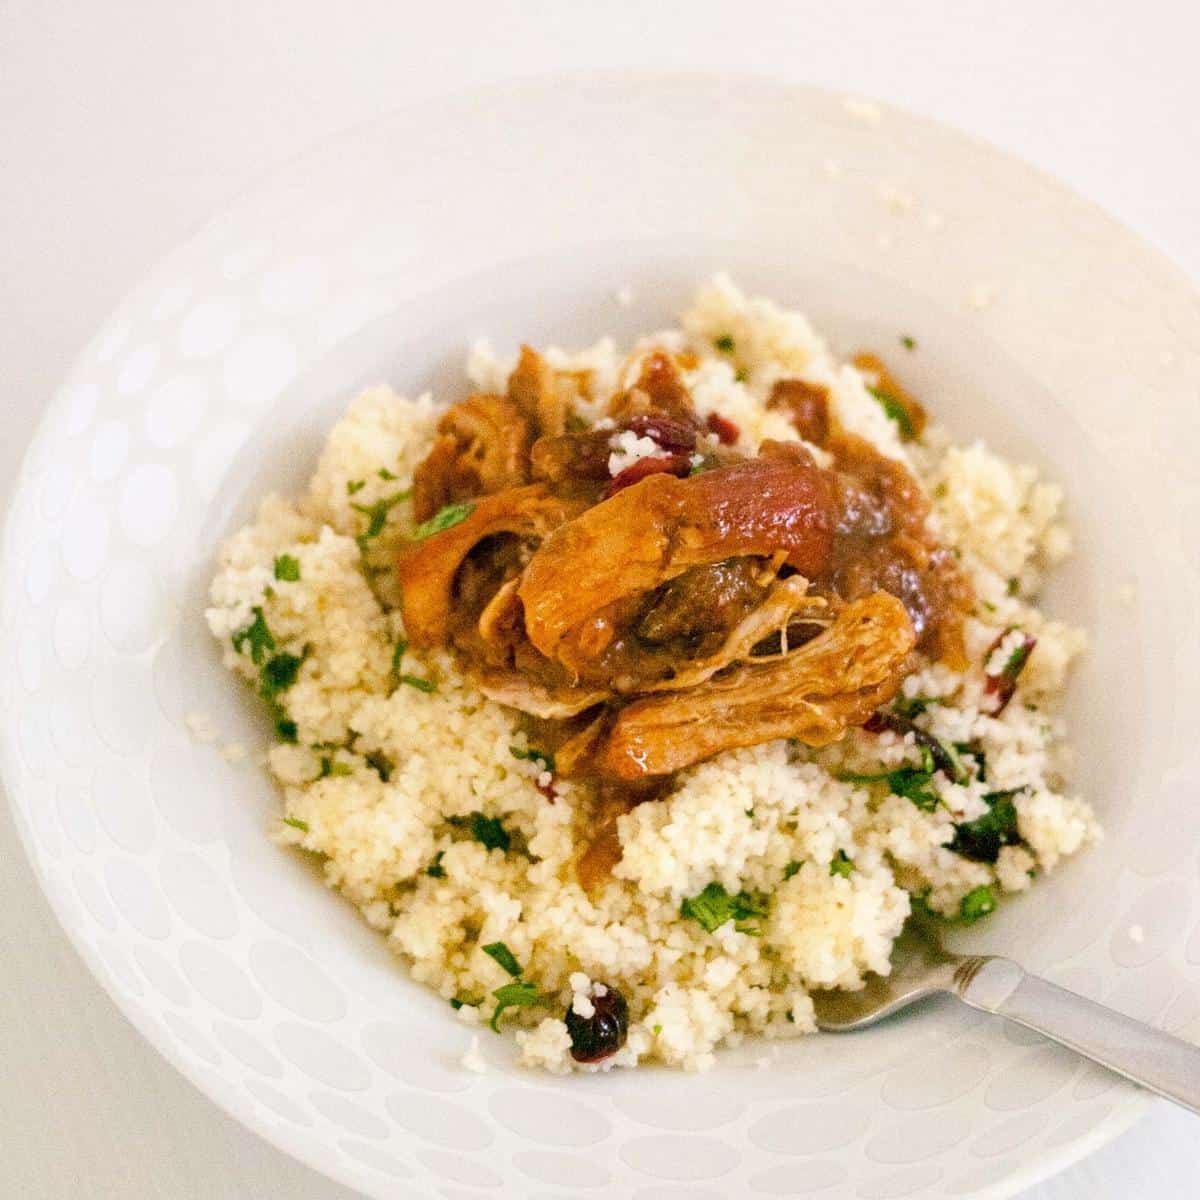 A bowl with slow-cooked chicken and couscous.